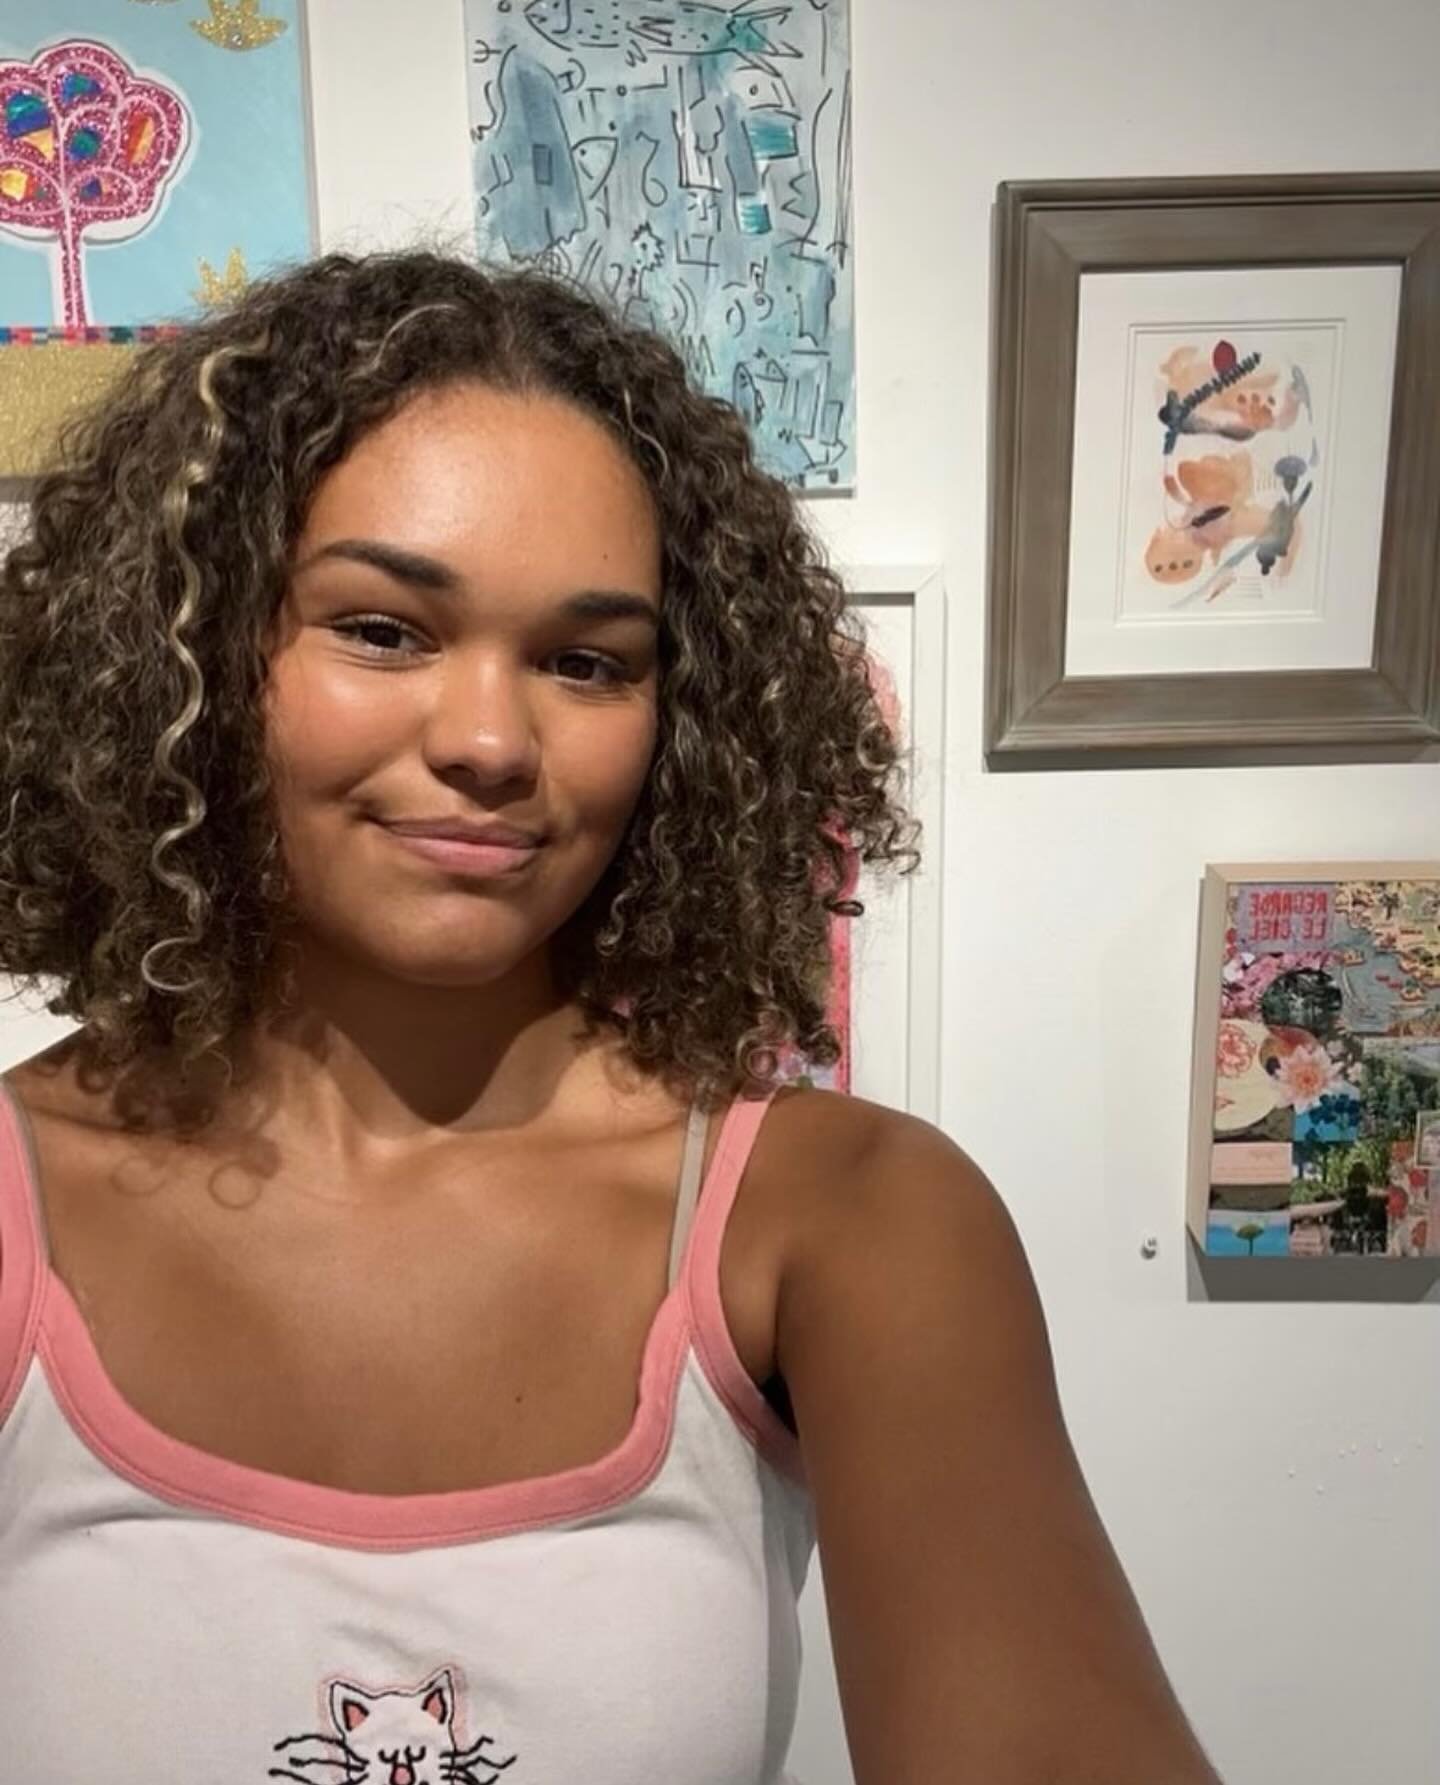 Thank you SO much Izzy @izzy_t05 @btwhspva @bookertvisual for being such an amazing and invaluable intern this past year at Art on Main! We will miss you very much!  Know you will always be a part of the Art on Main family! Congratulations on being a